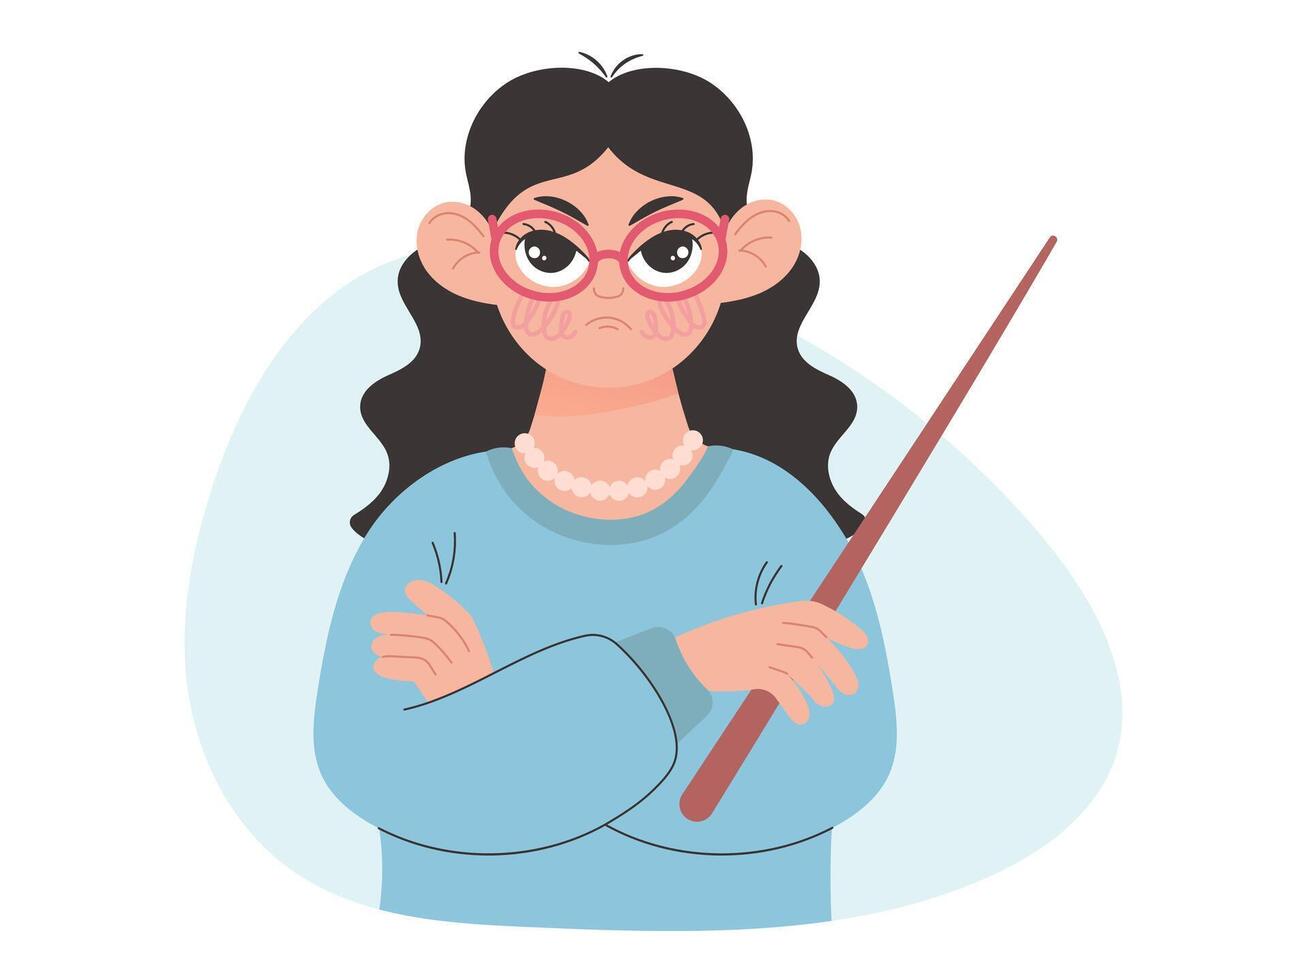 Angry teacher with folded hands, vector illustration